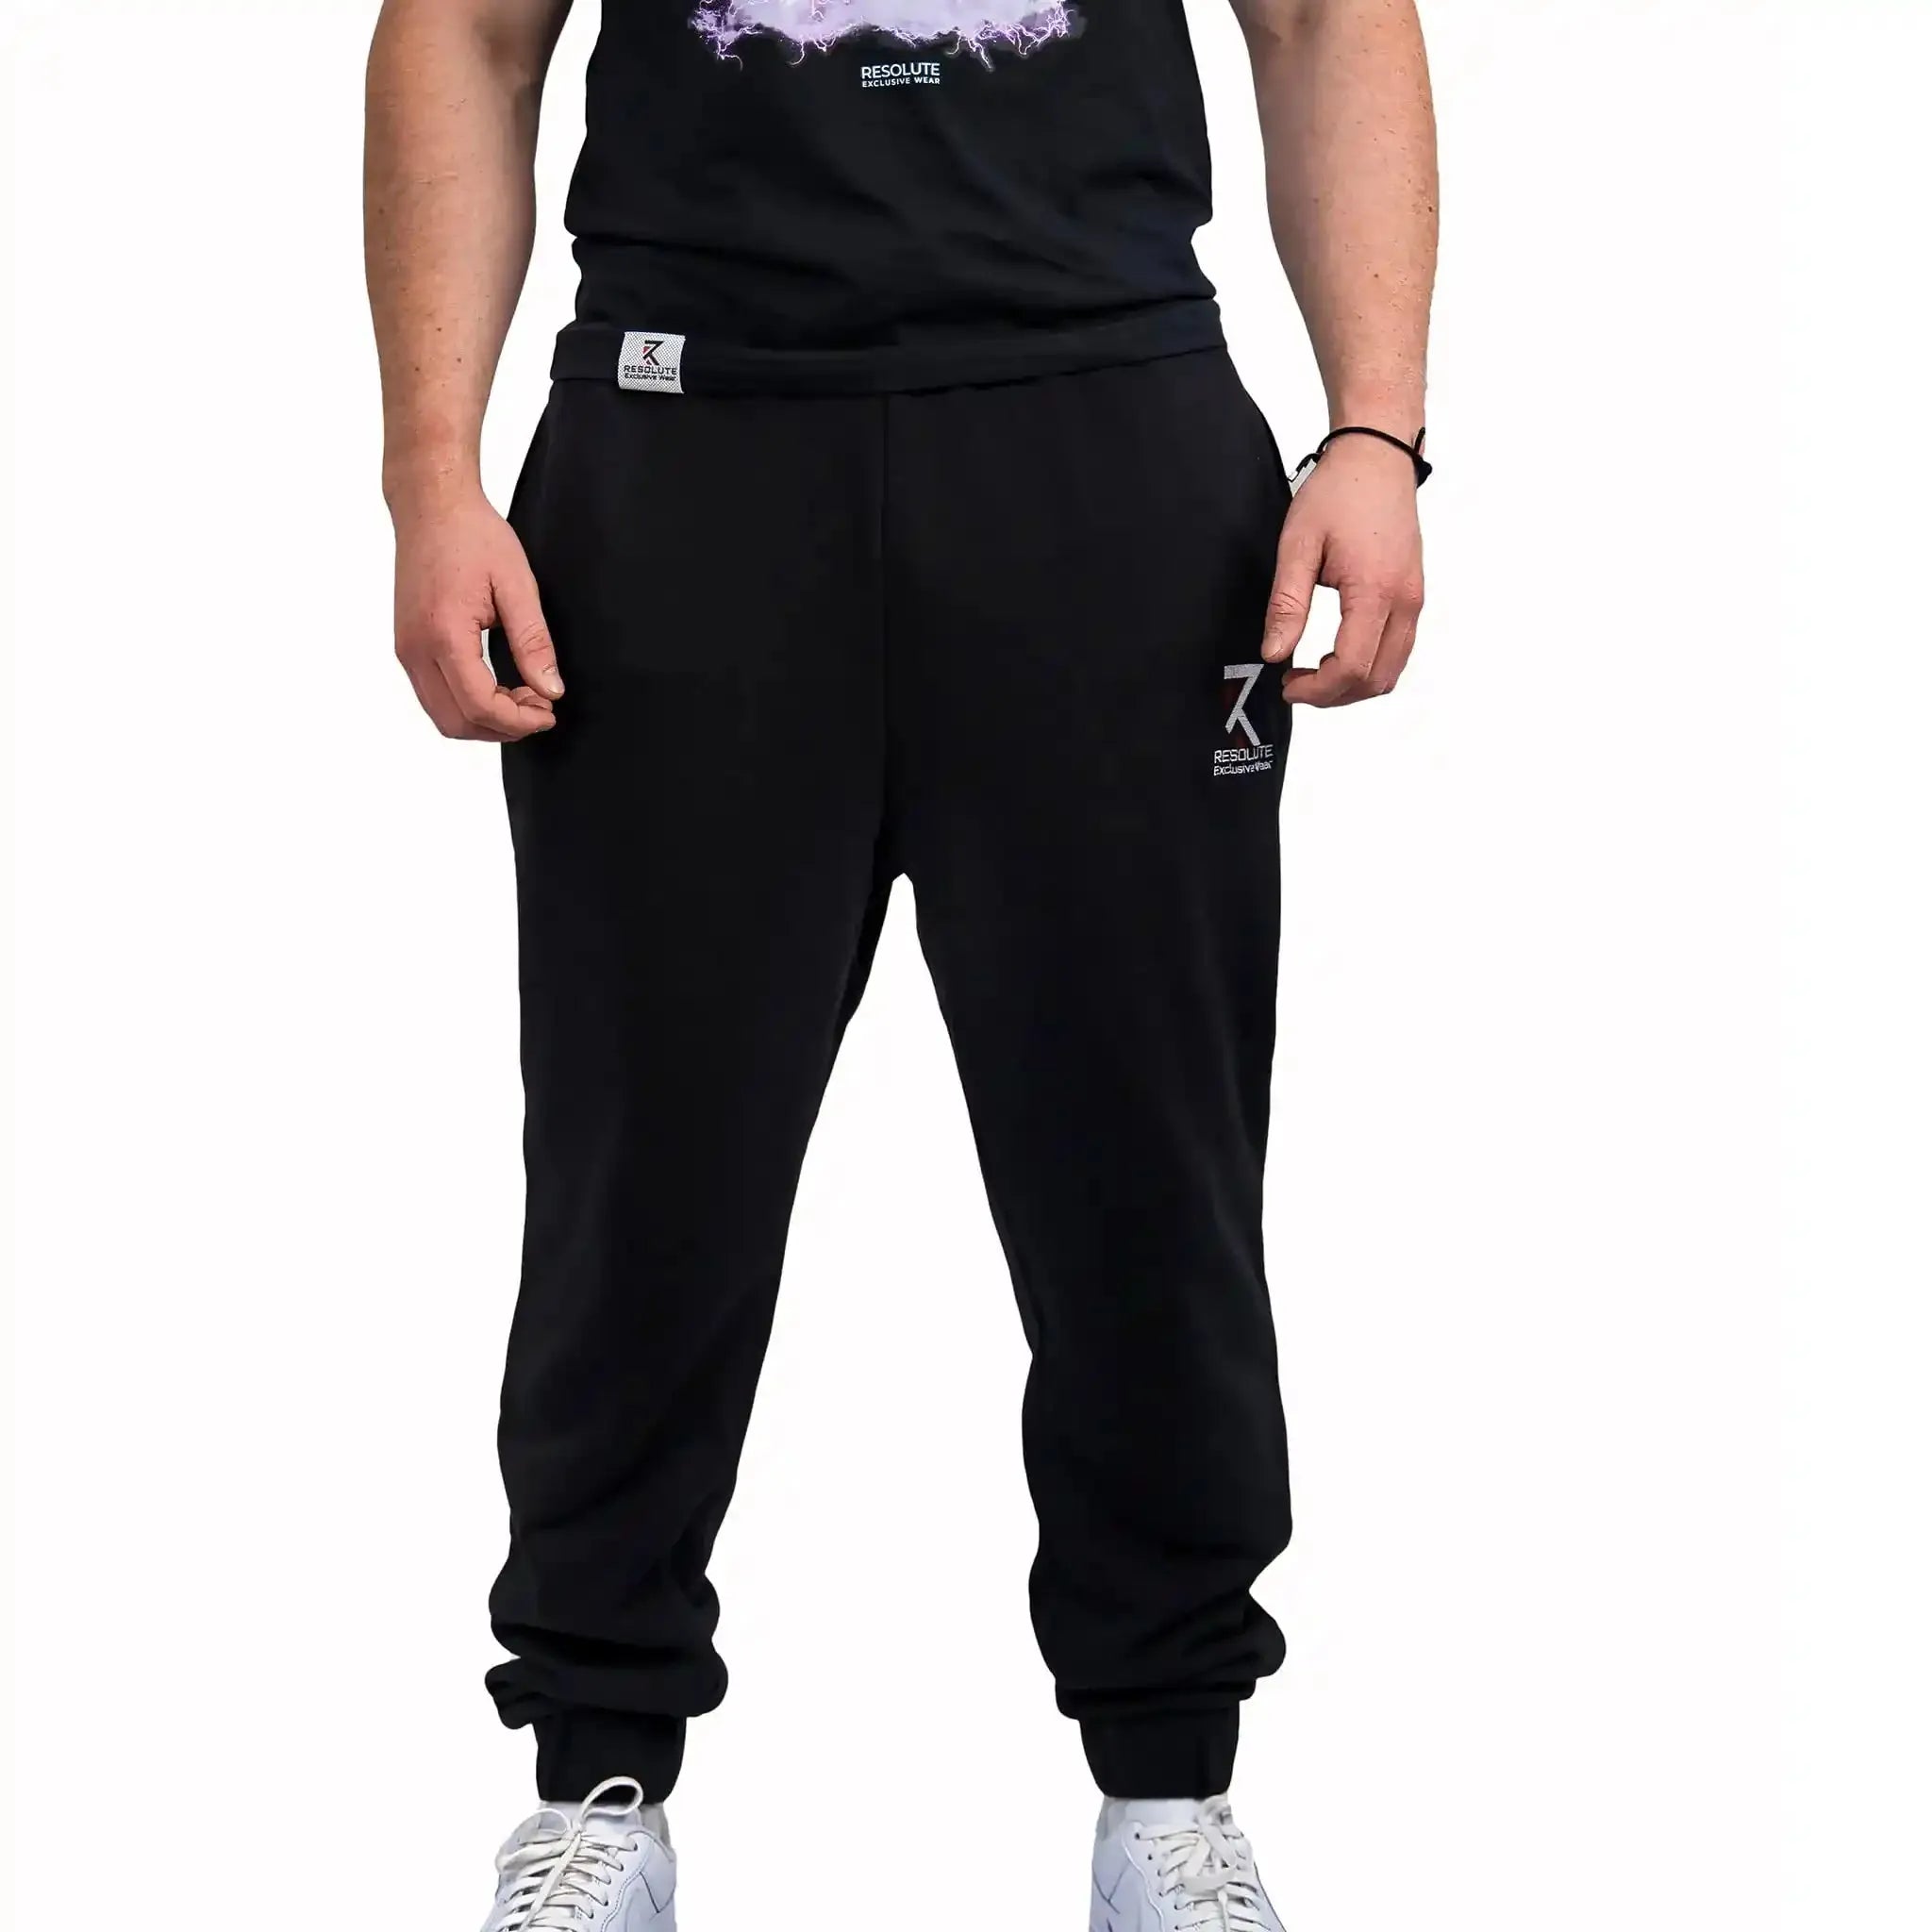 Super Heavy Sweatpants, Hose, Clothing, Resolute Exclusive Wear